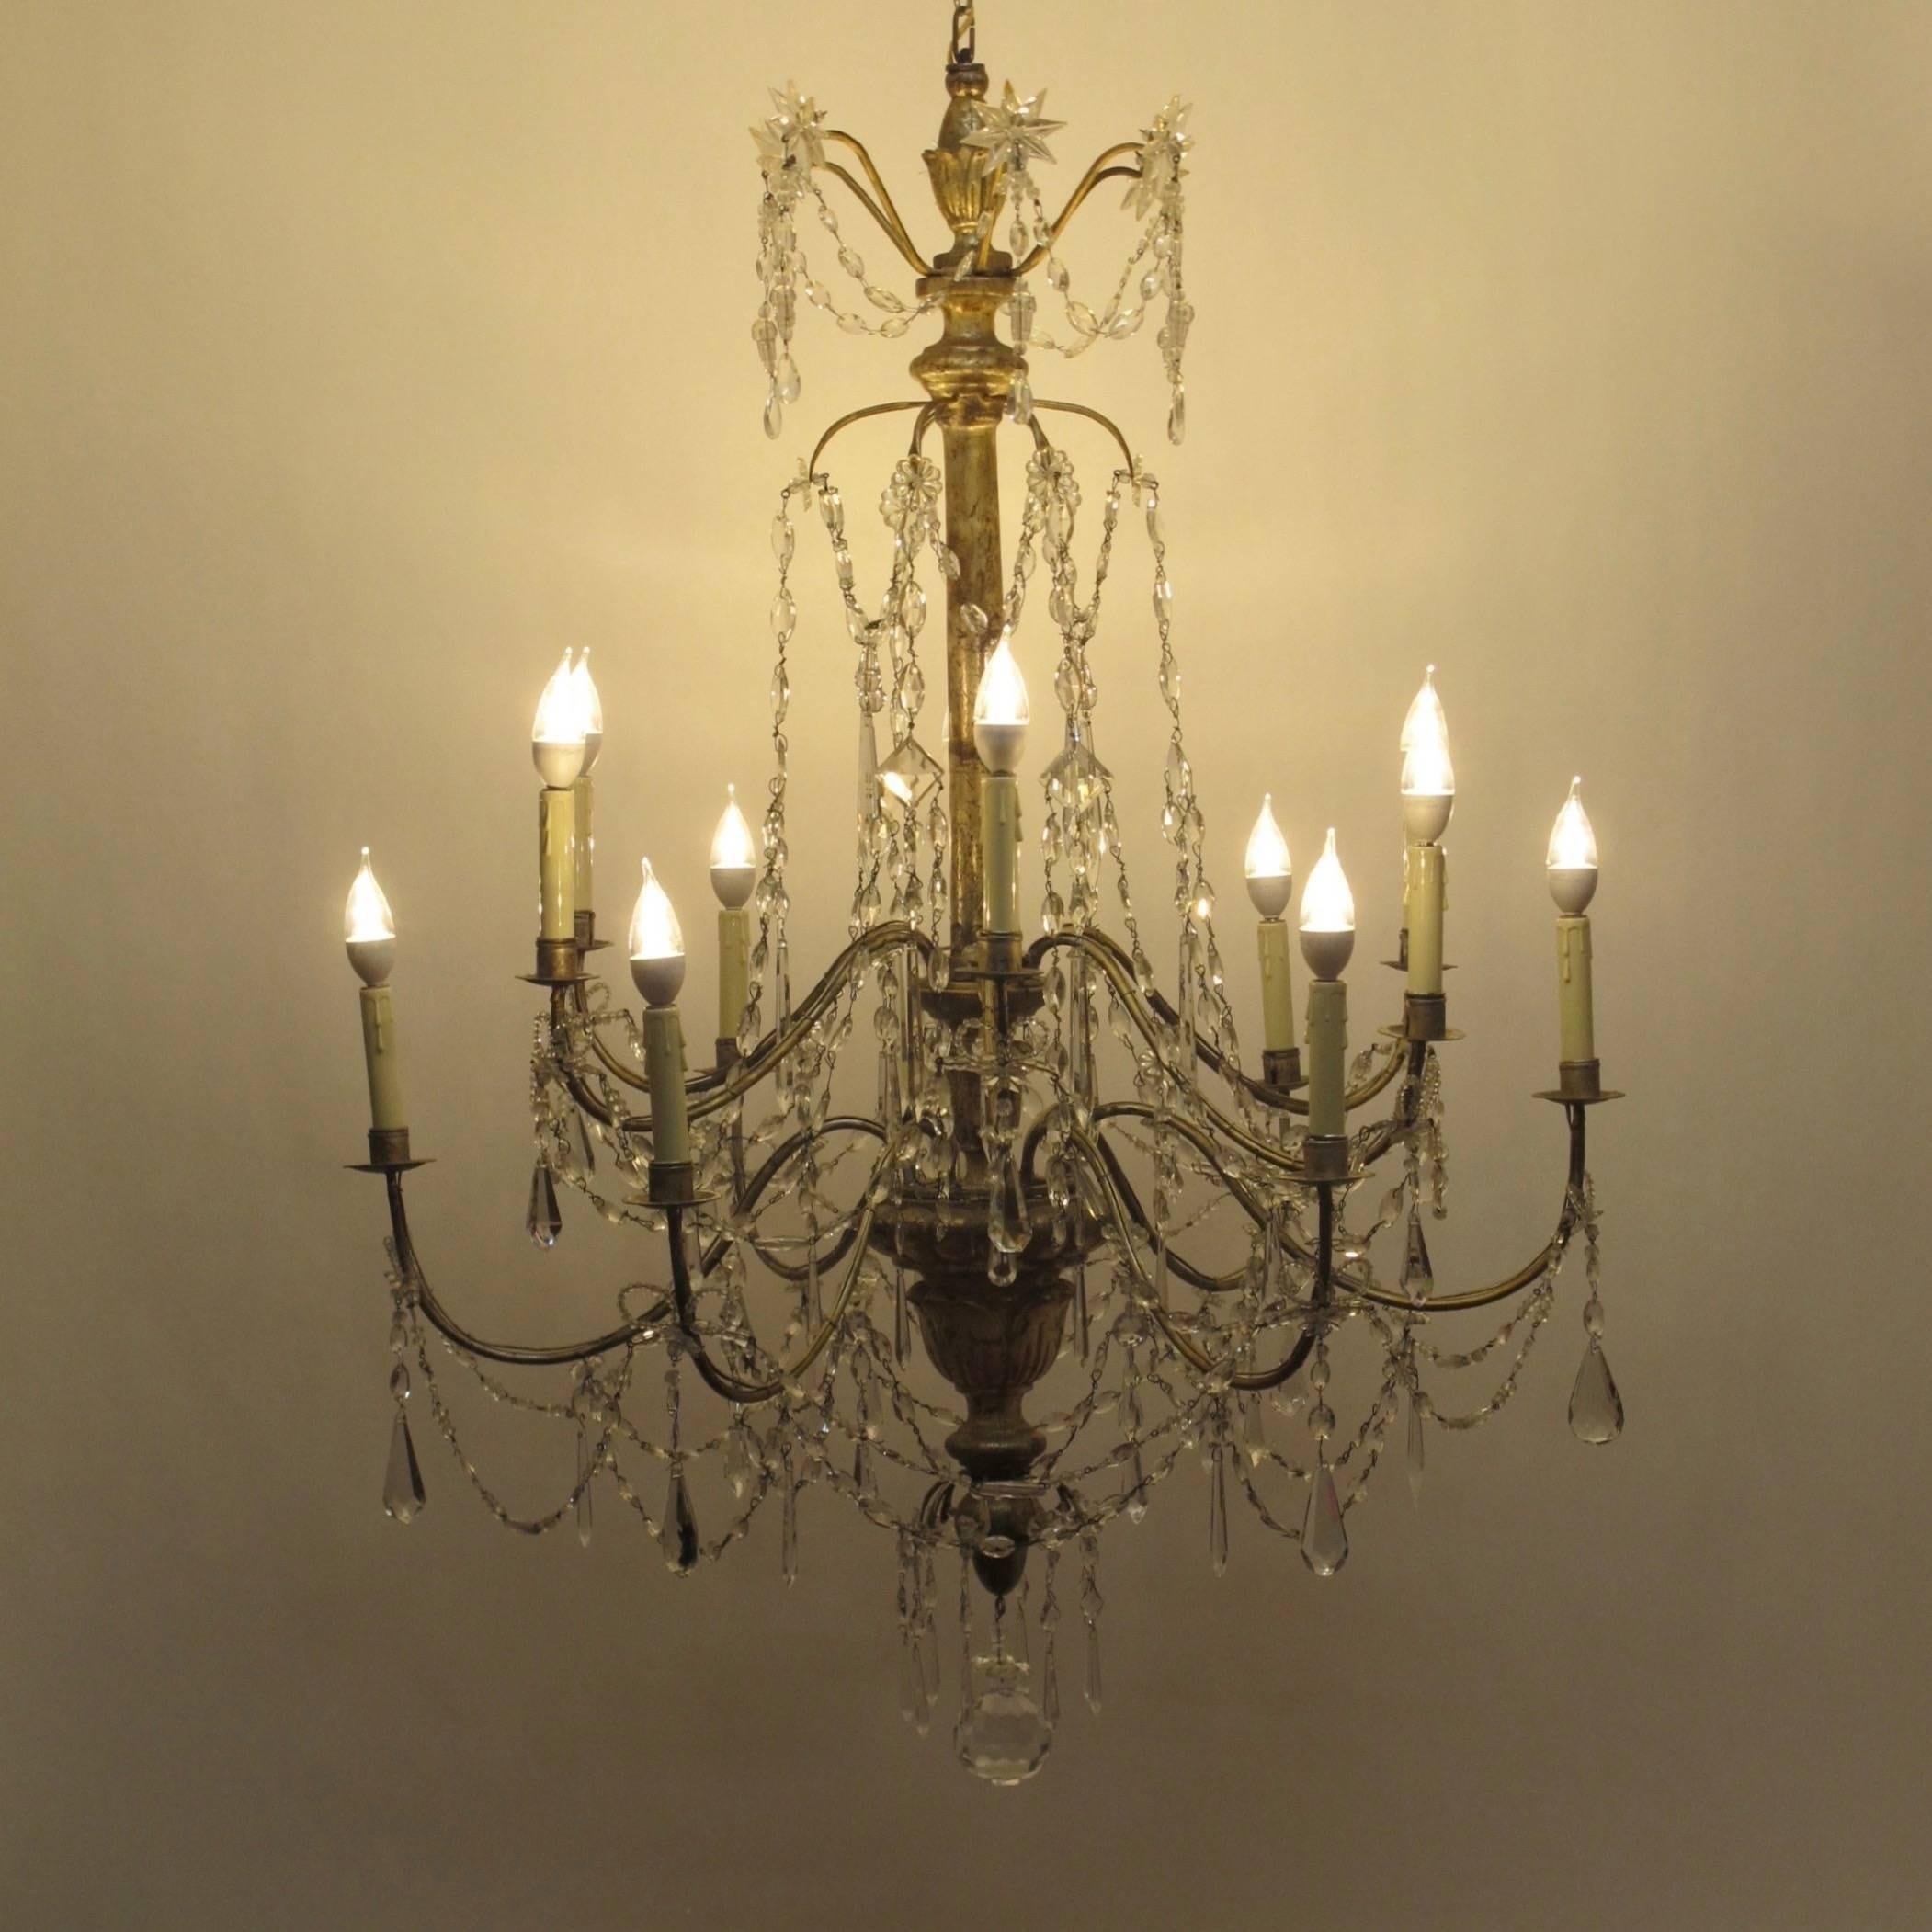 Large Silver Gilt Wood, Iron, and Crystal Chandelier, Italian 18th Century For Sale 2